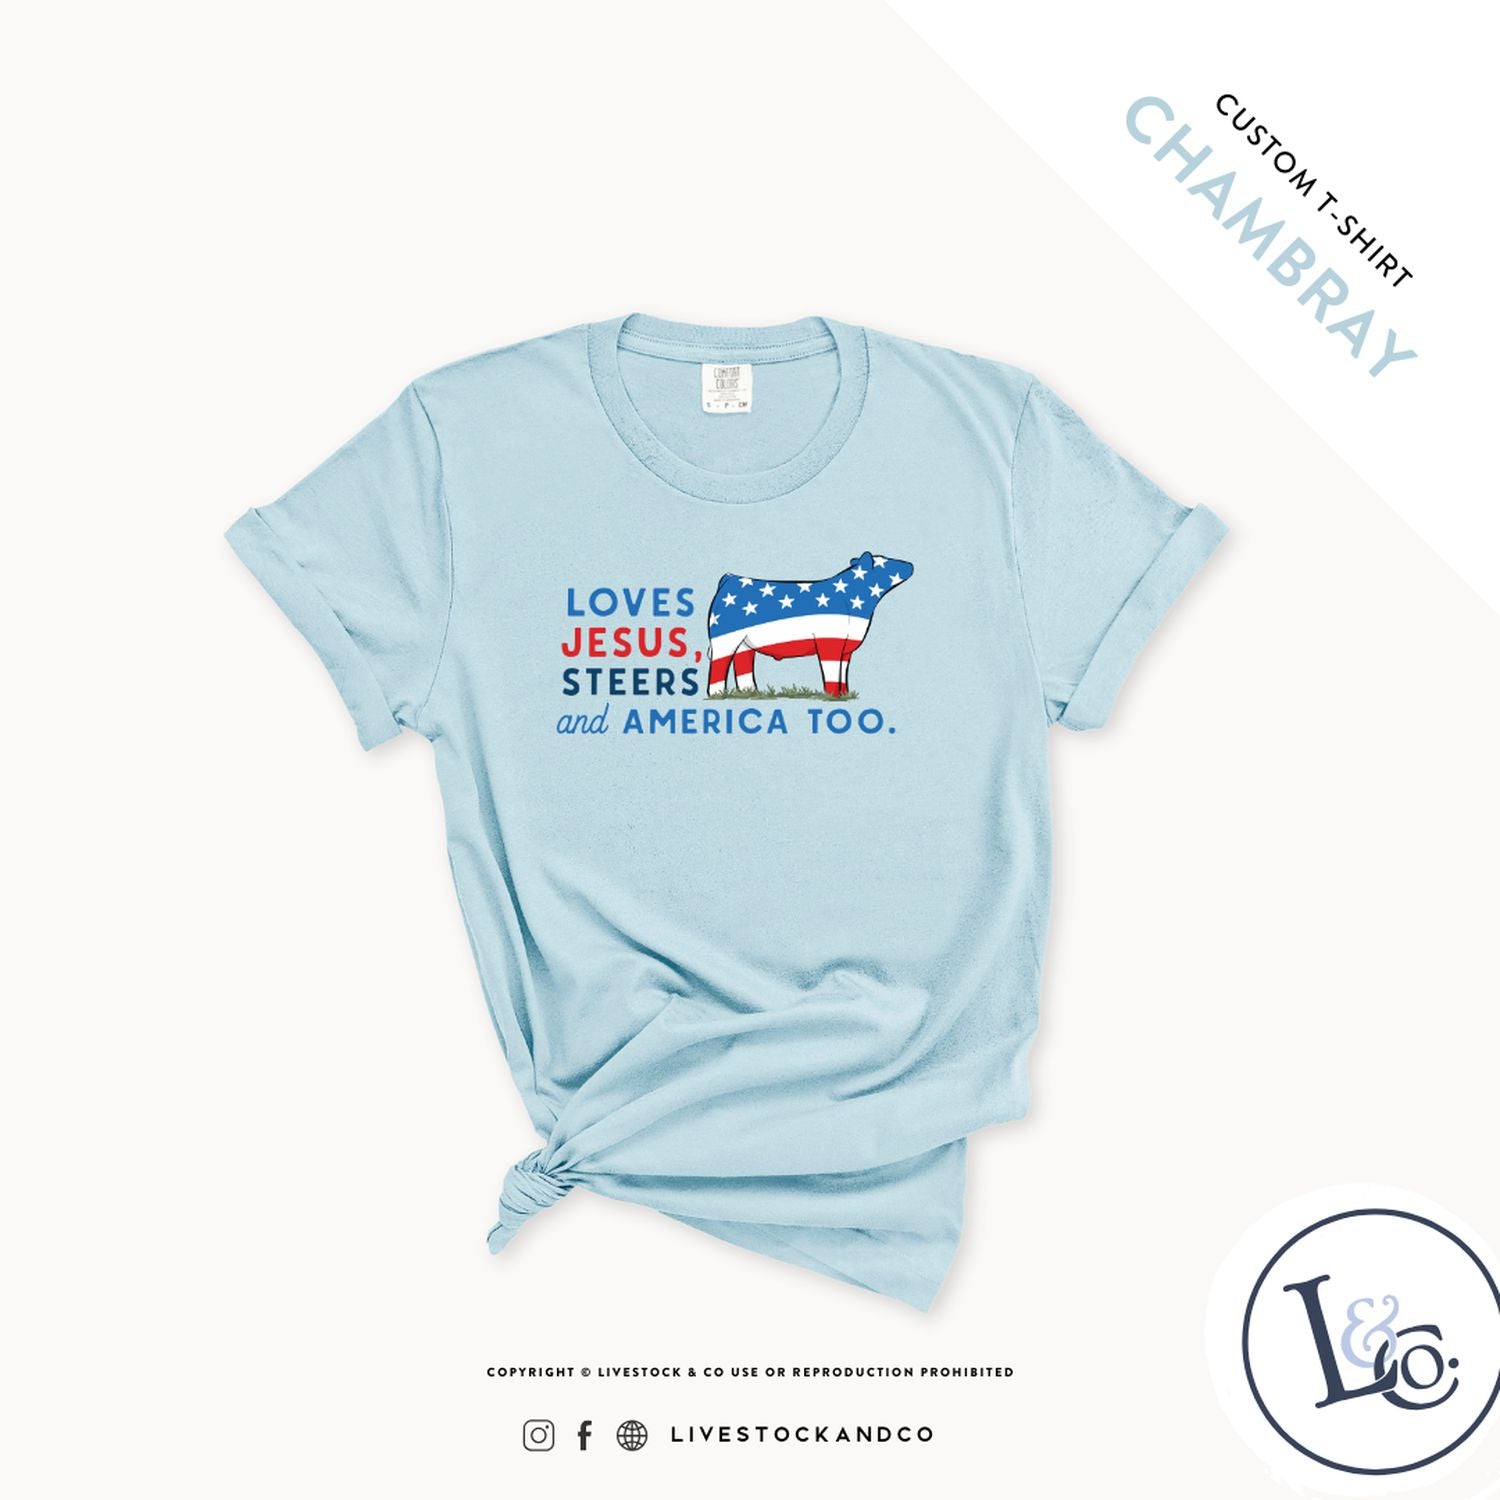 Custom Made Loves Jesus, Steers and America Too - Youth T-Shirt Stock Show Livestock - Livestock &amp; Co. Boutique